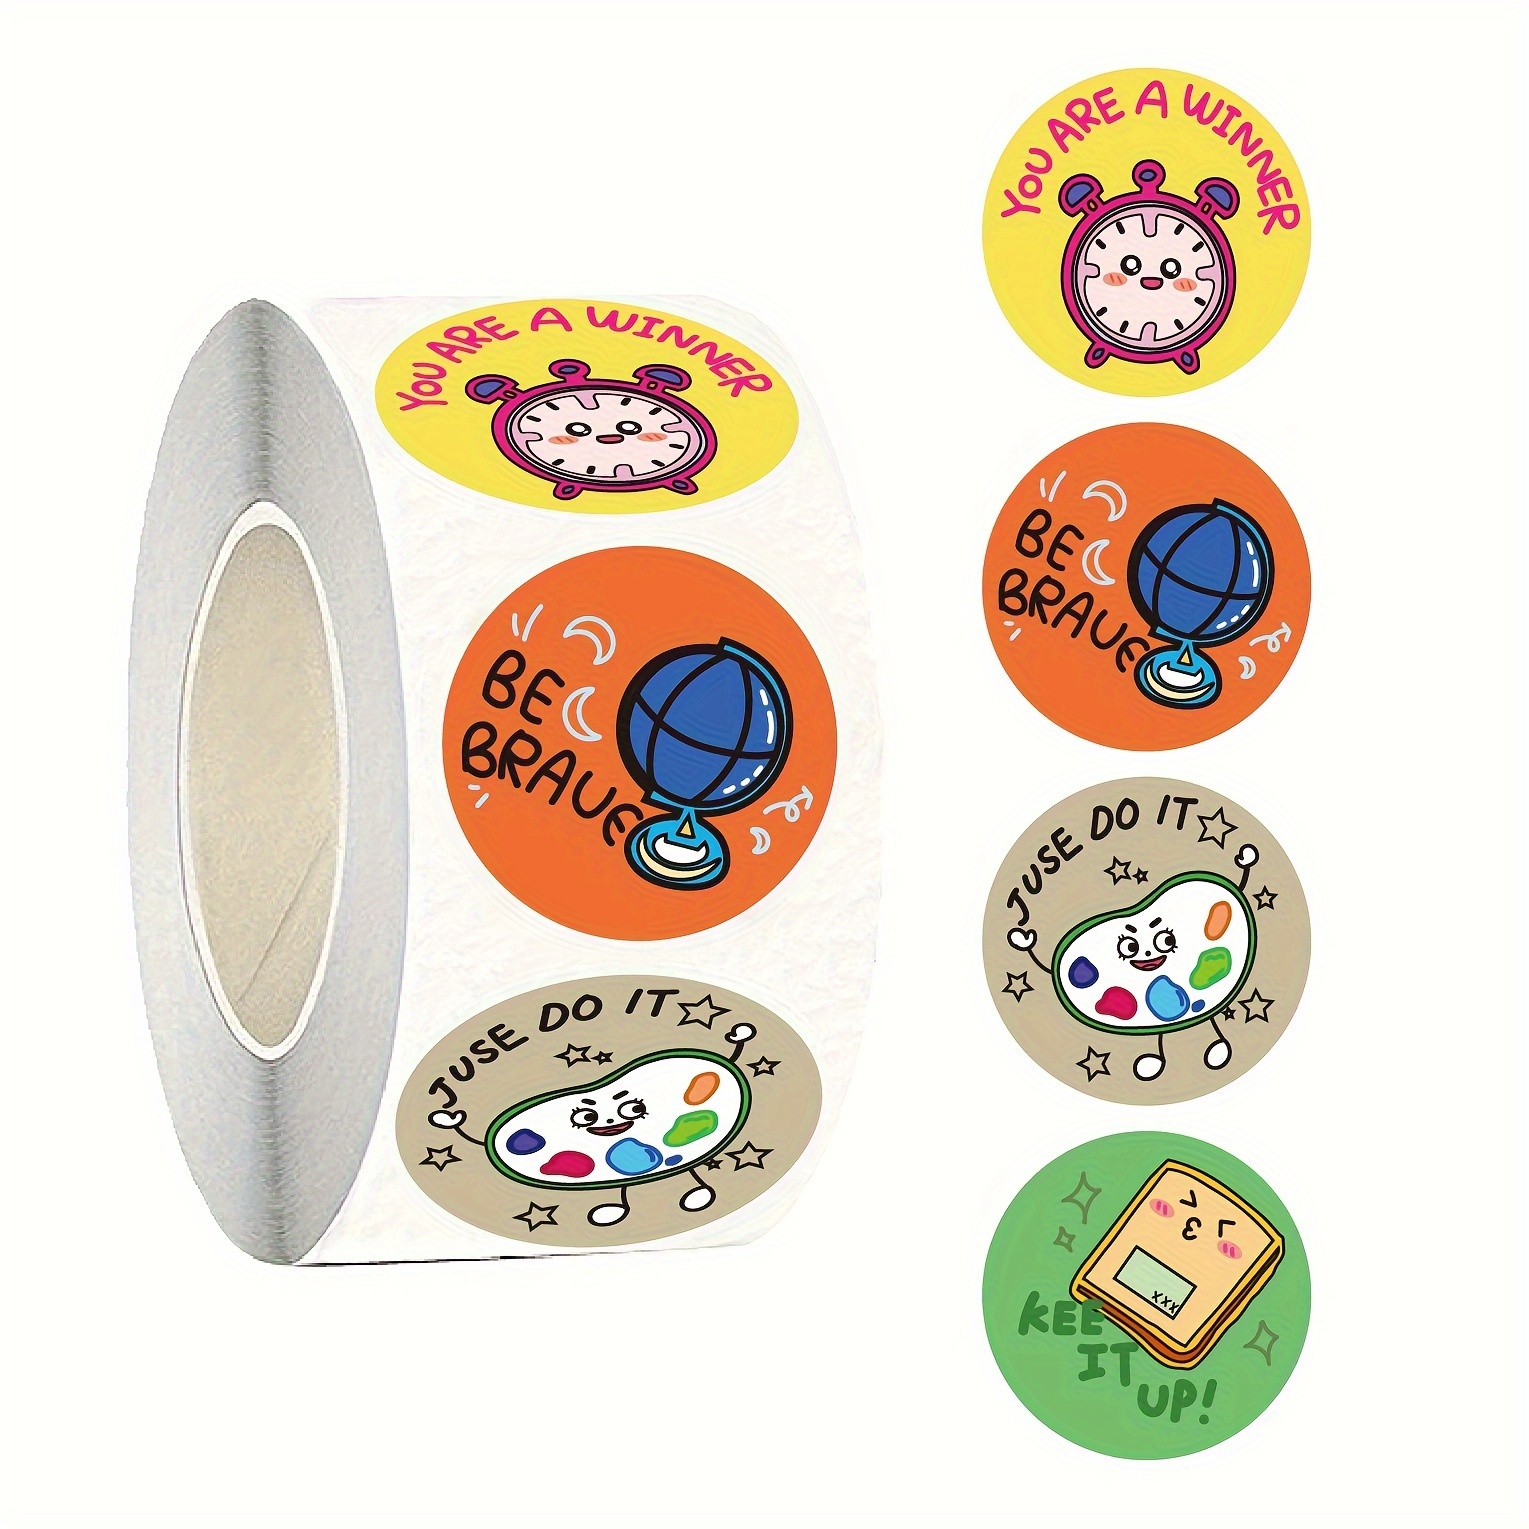 1000 Pcs Reward Stickers for Kids, 1 inch Reward Stickers for Teachers in 16 Designs, Round Motivational Stickers Self Adhesive Encouraging Stickers